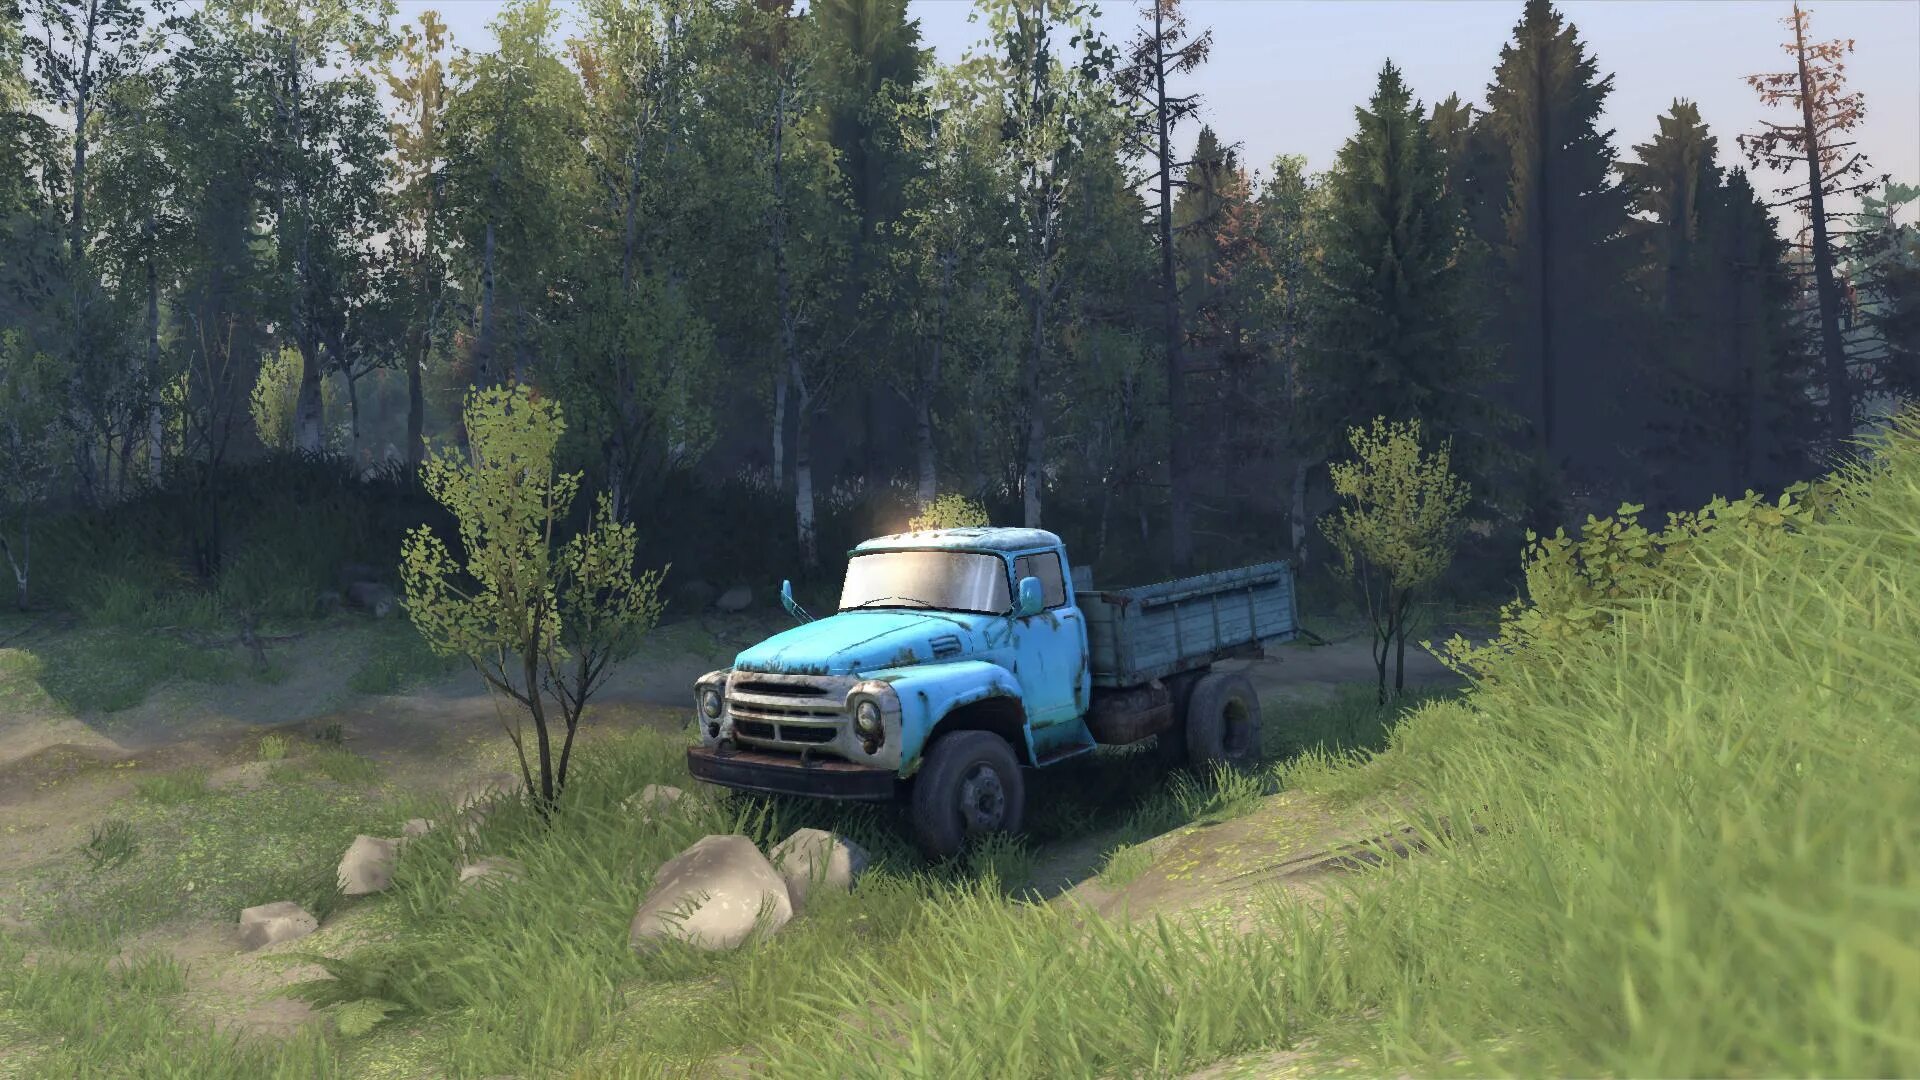 Expeditions a mudrunner game прохождение. МТЗ 50 Spin Tires. Испинтерес. SPINTIRES: MUDRUNNER. Spin Tires Скриншоты.